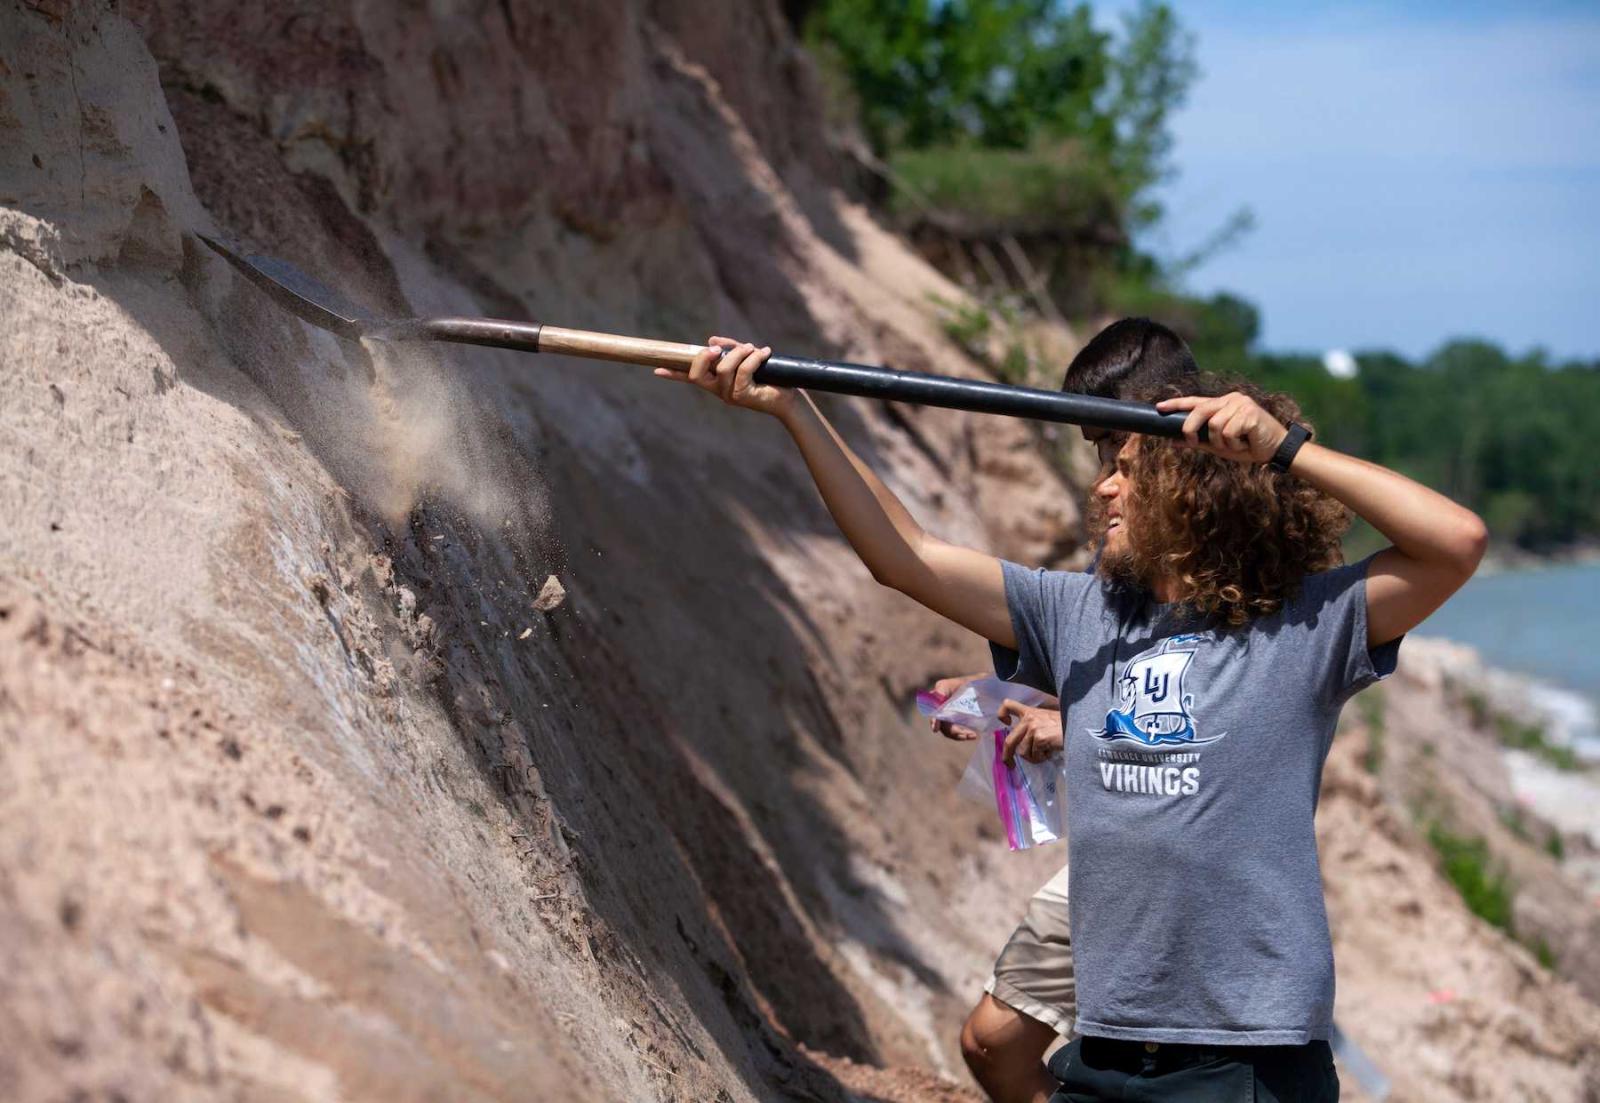 Students use shovels as they pull materials from a cliff during a research project near Two Rivers.